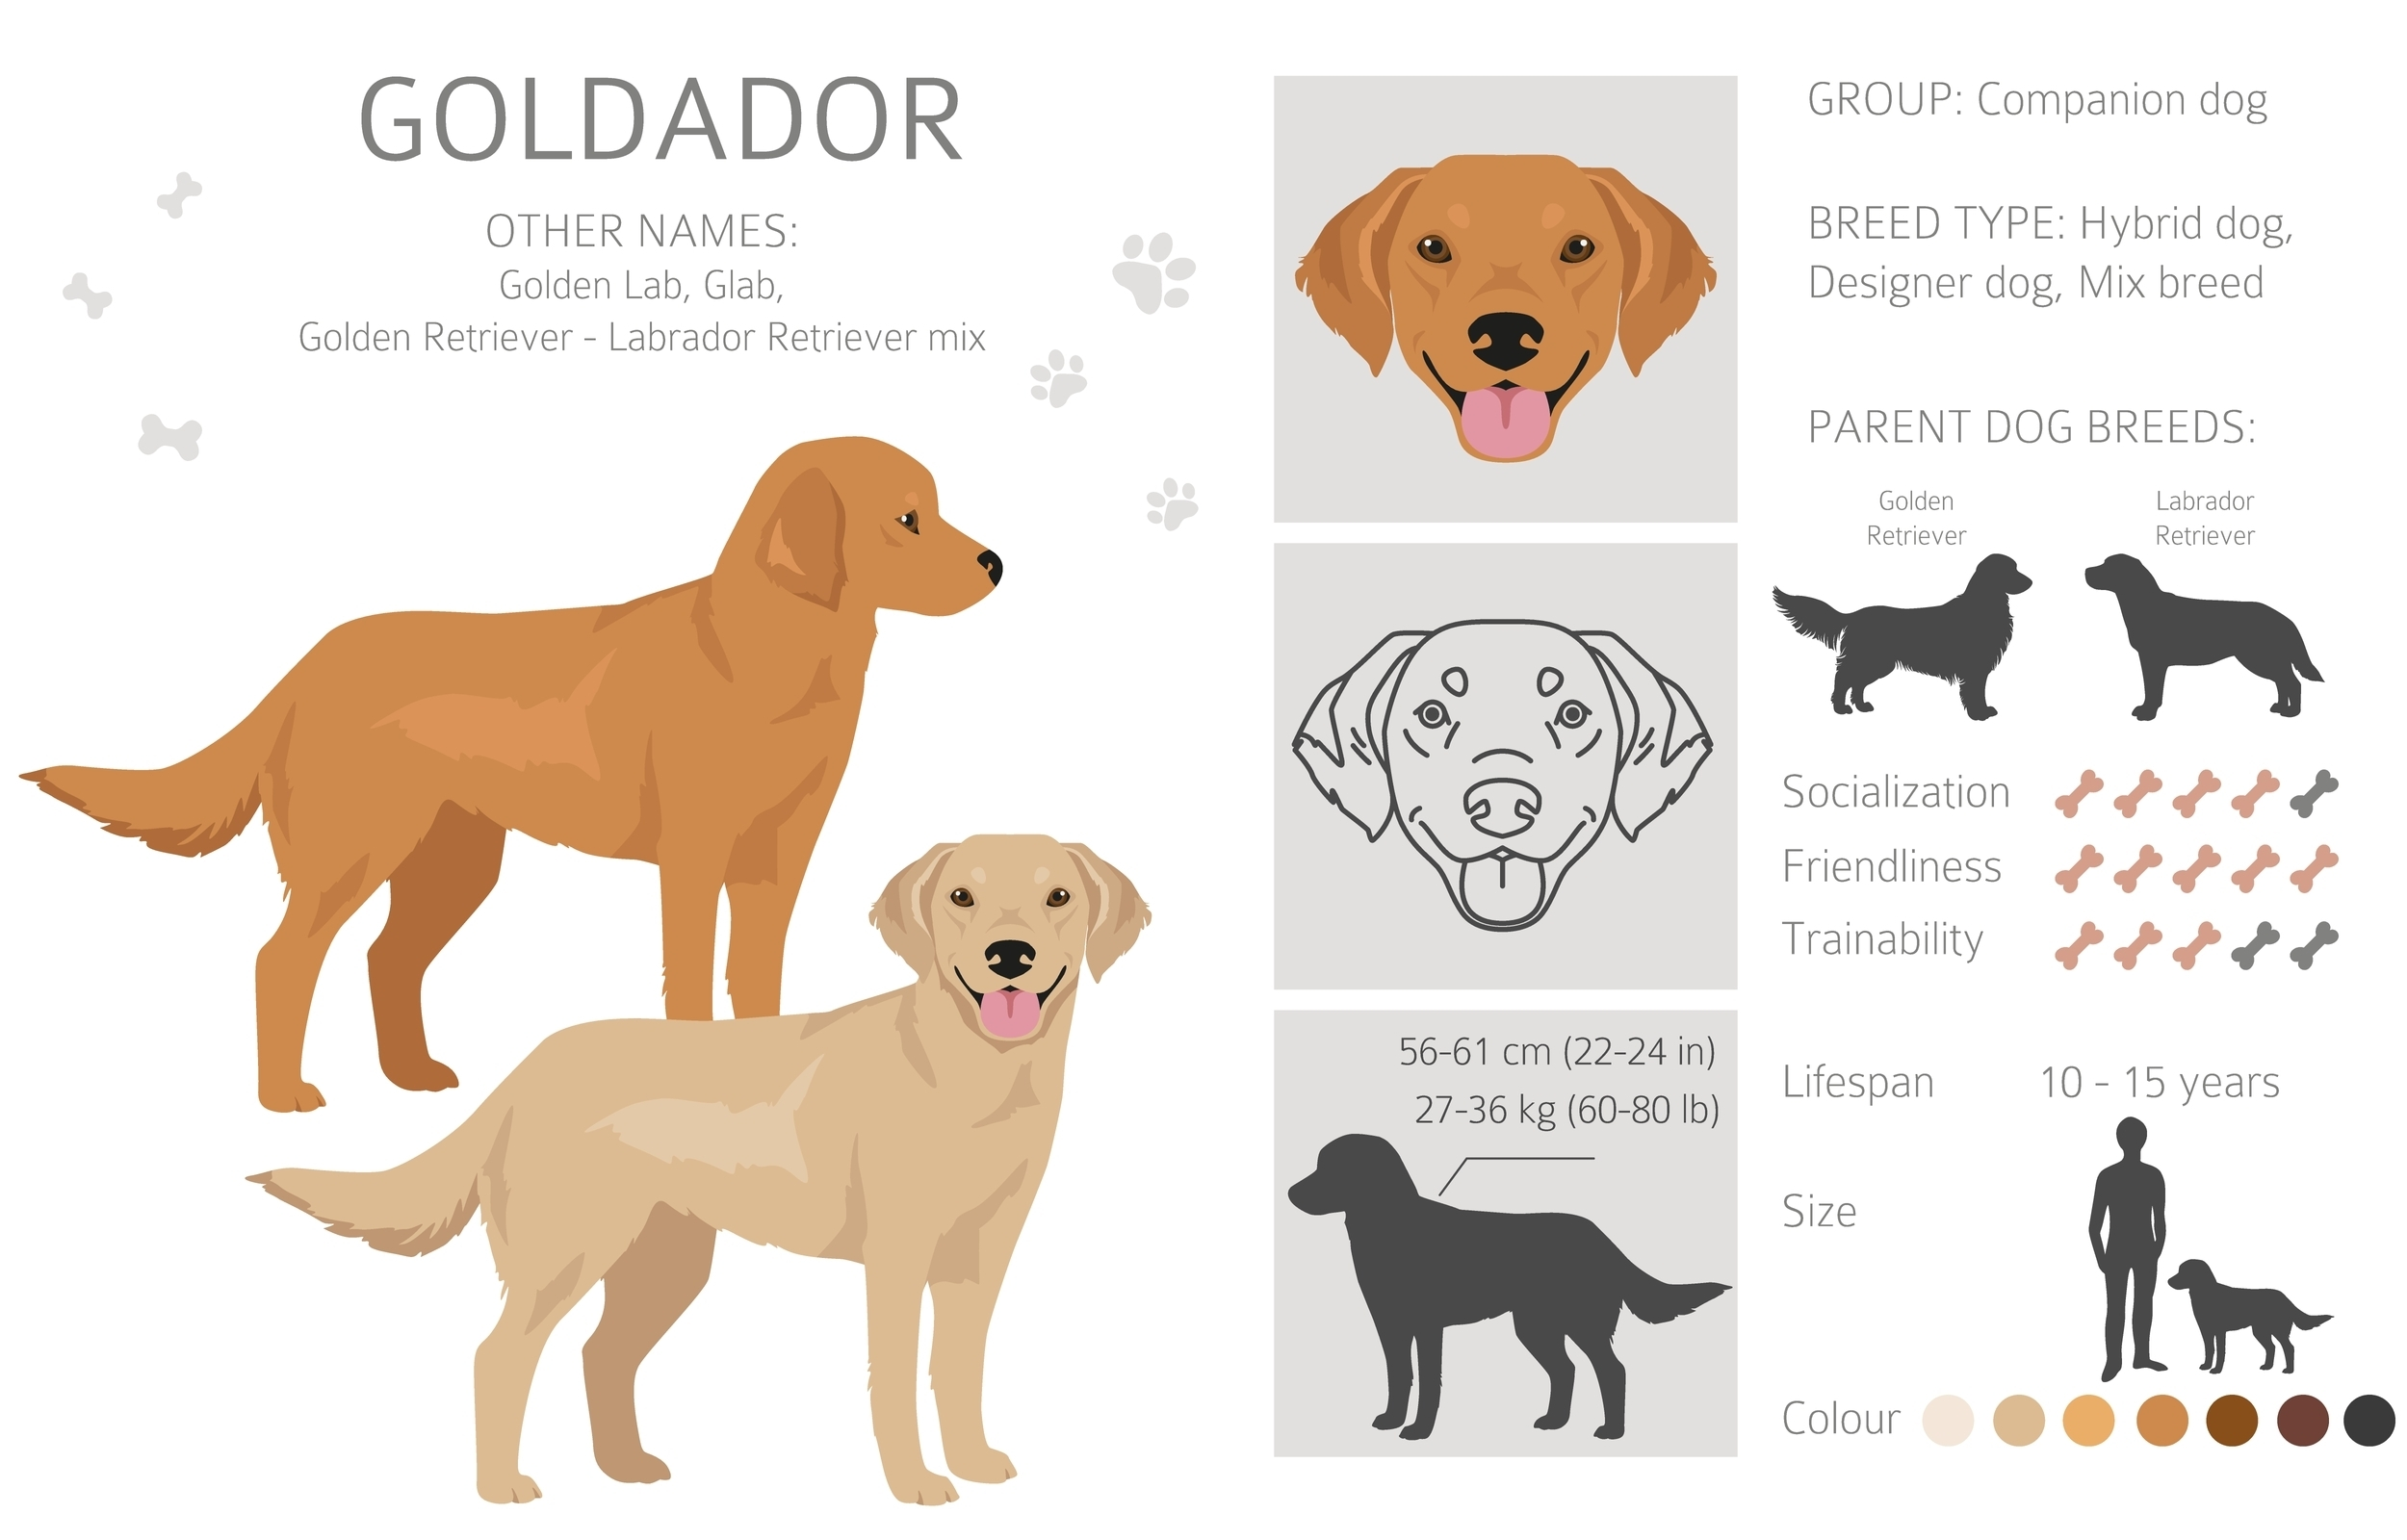 An infograpic of the Goldador showing other names, colors, and health info